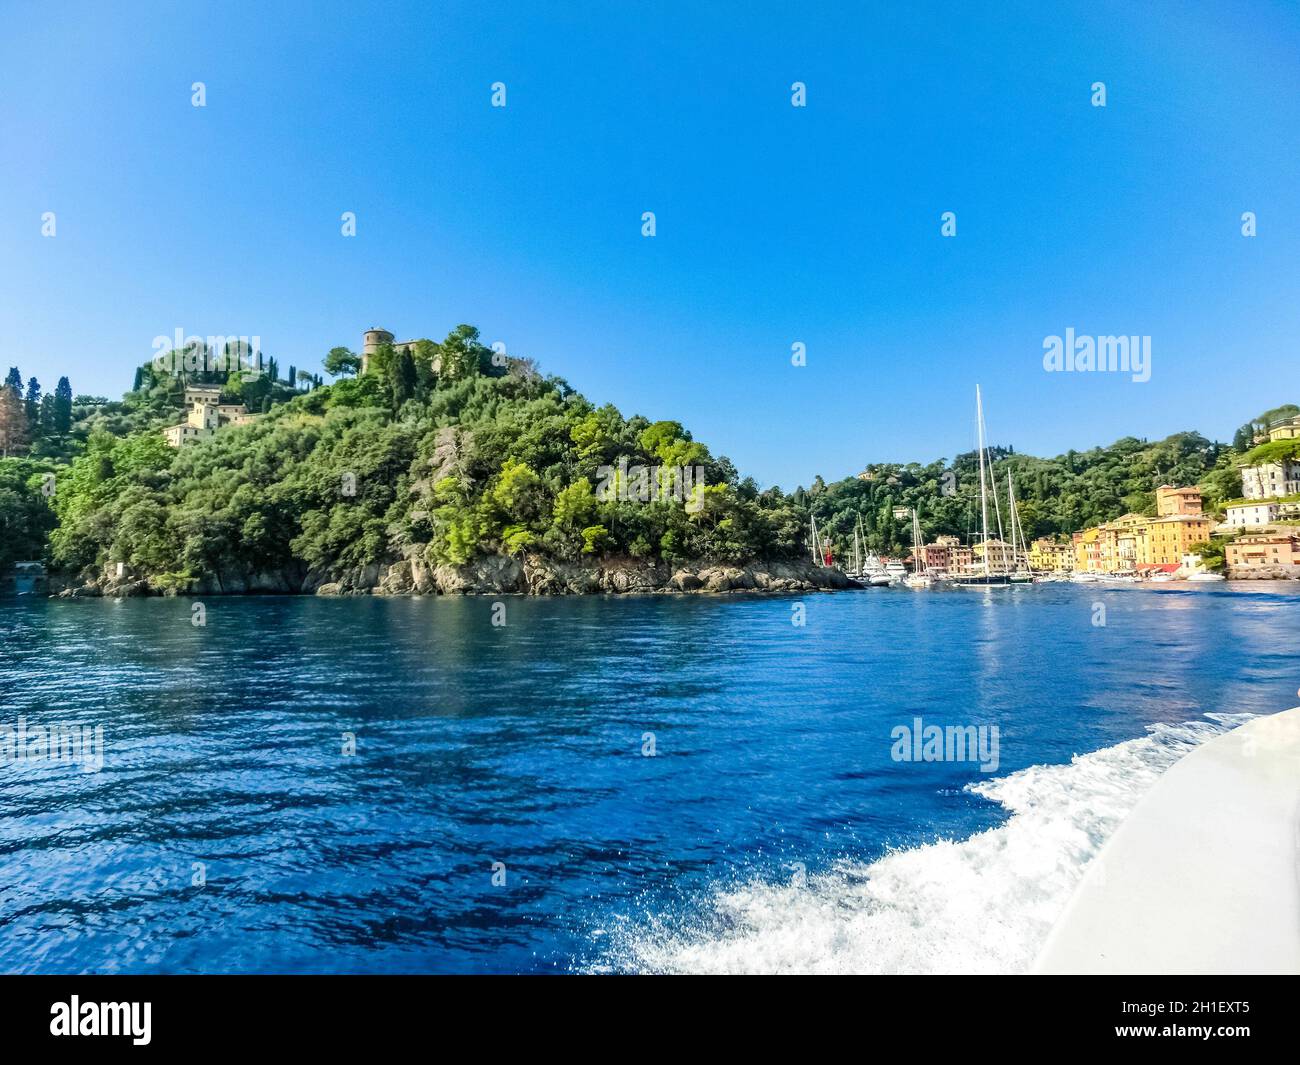 Beautiful bay with colorful houses in Portofino, Liguria, at Italy Stock Photo